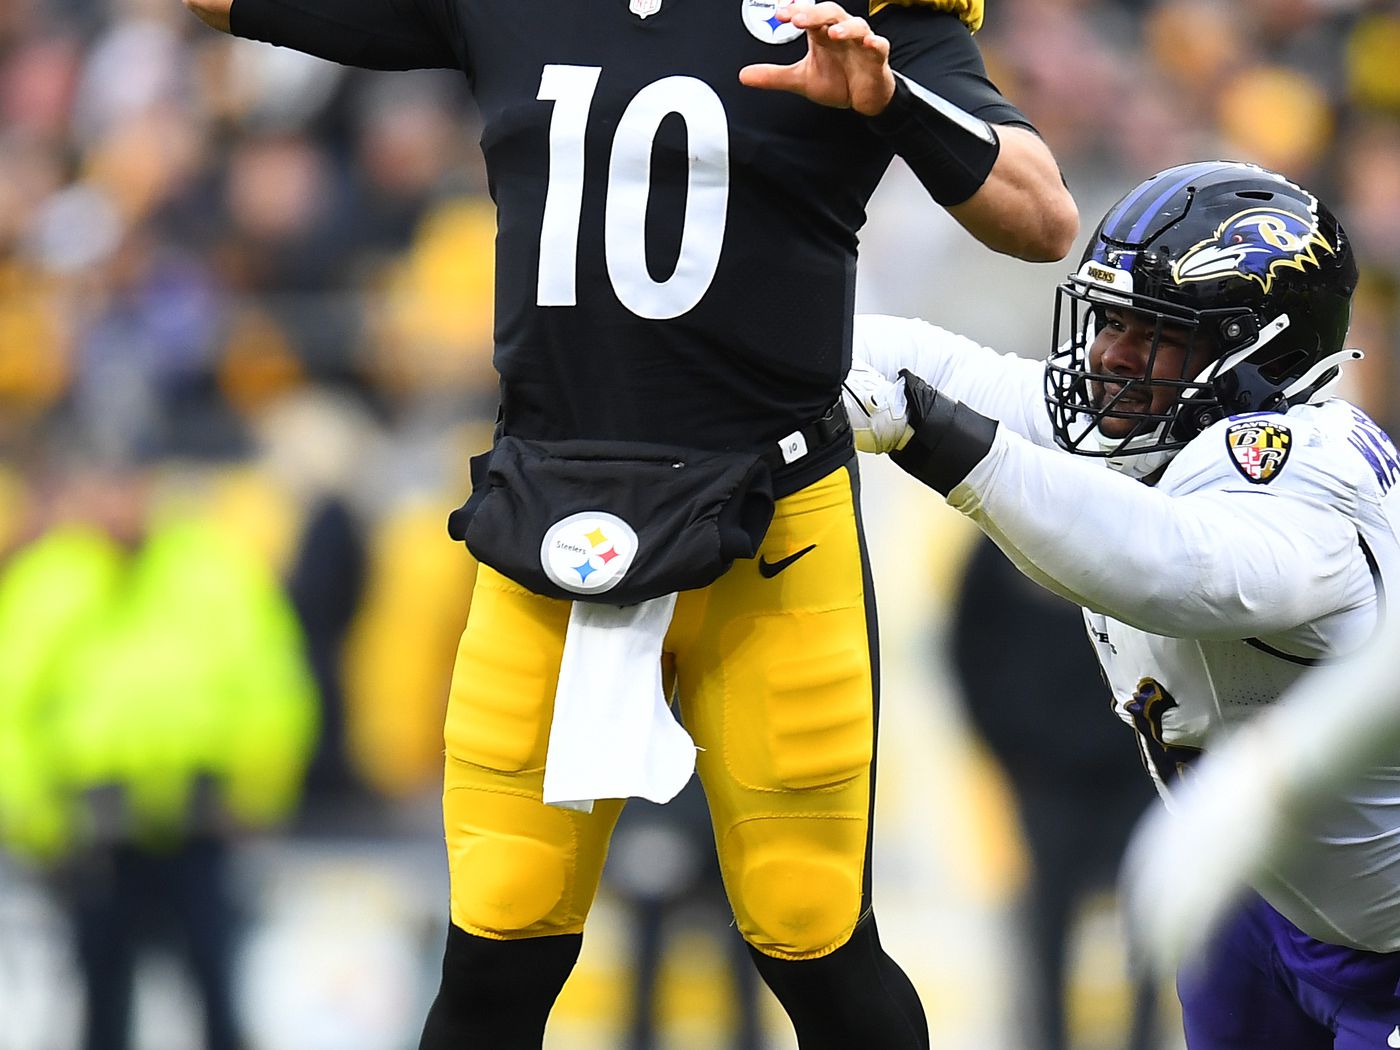 NFL Game 177, better known as Steelers-Ravens II, causes stir for